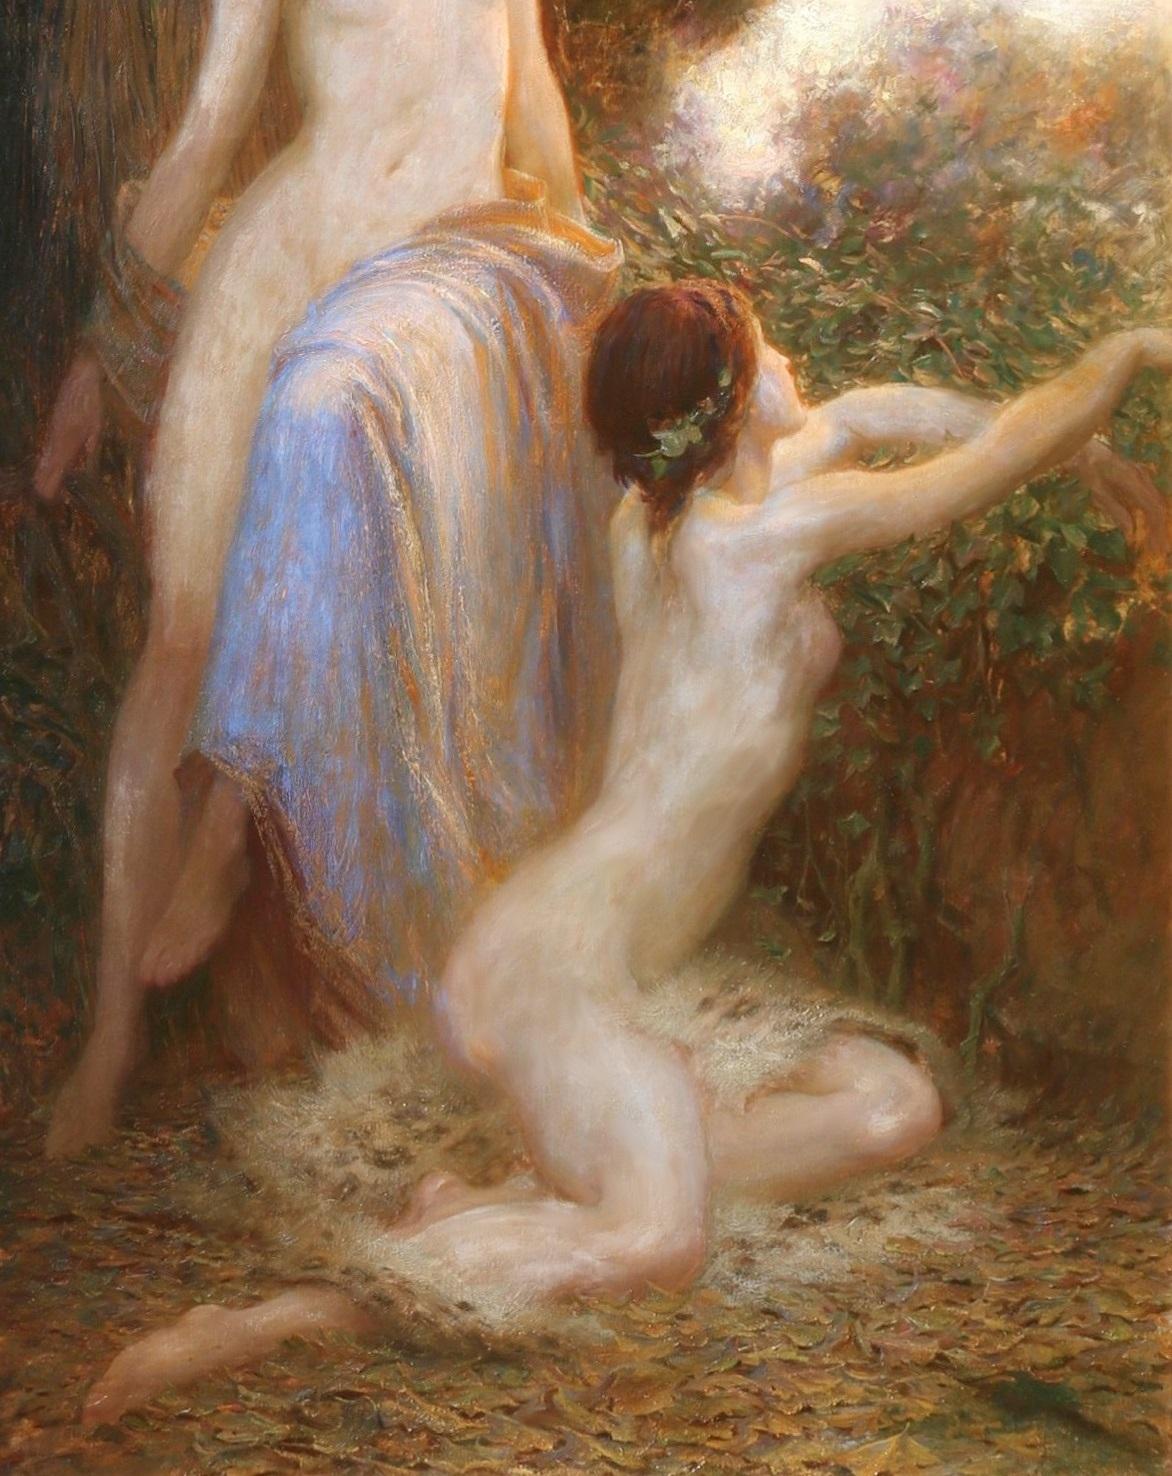 Awakening - Monumental Royal Academy Oil Painting of Nymphs Neoclassical Nudes 3